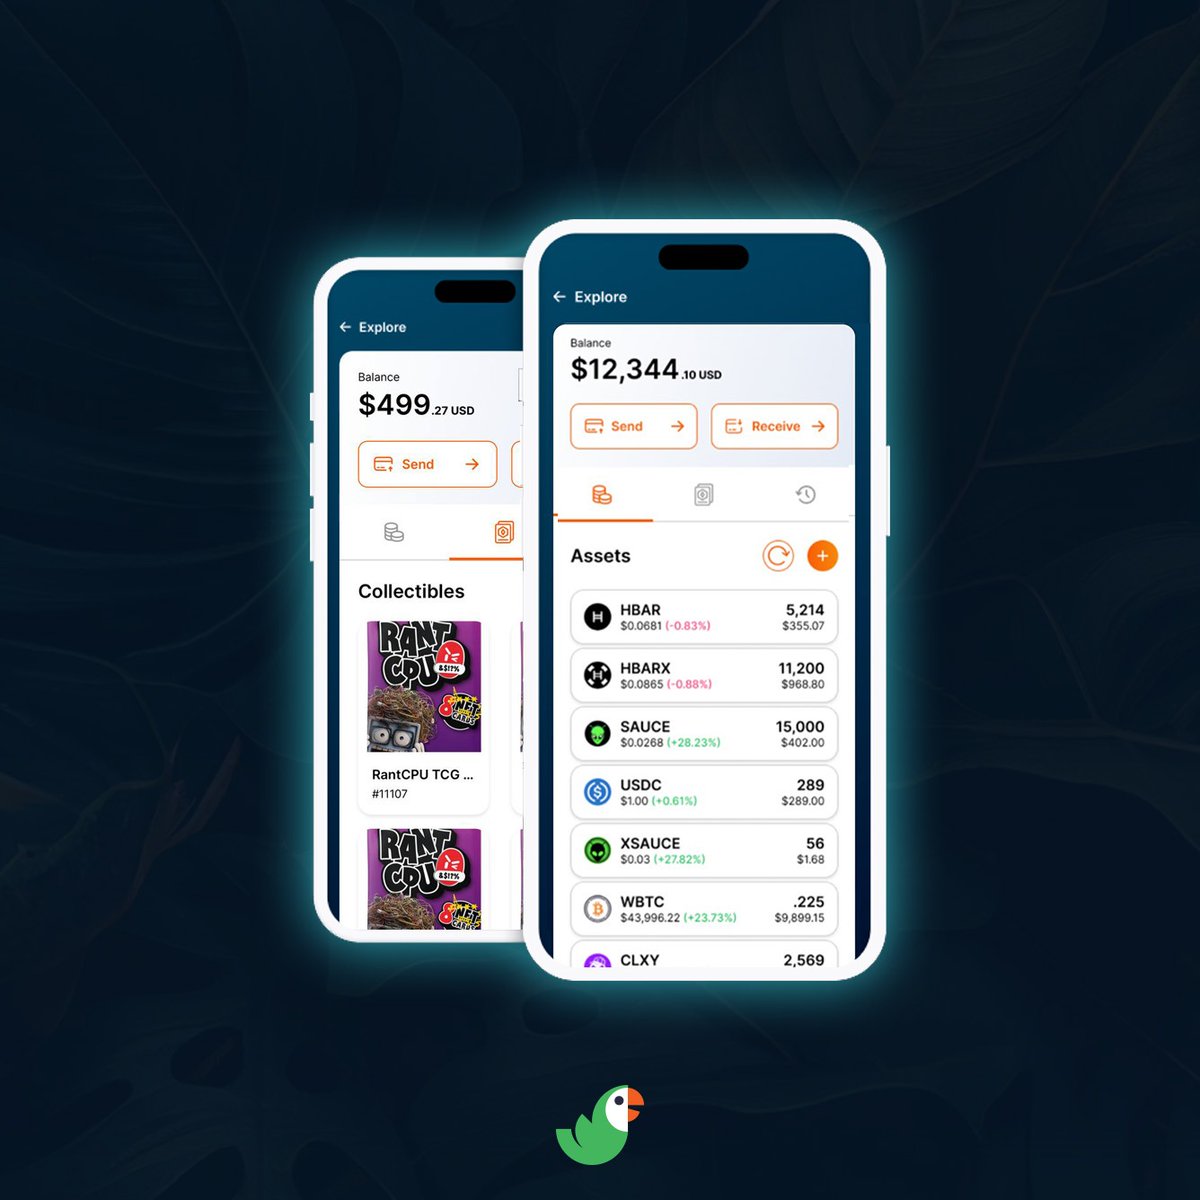 MingoWallet is now a Progressive Web App ! Say goodbye to 30% fees from Google and Apple for in-app purchases, and a big hello to lightning-fast speeds, top-notch security, and ultra-low costs! Send, store, and manage your HTS tokens and NFTs like never before. Download